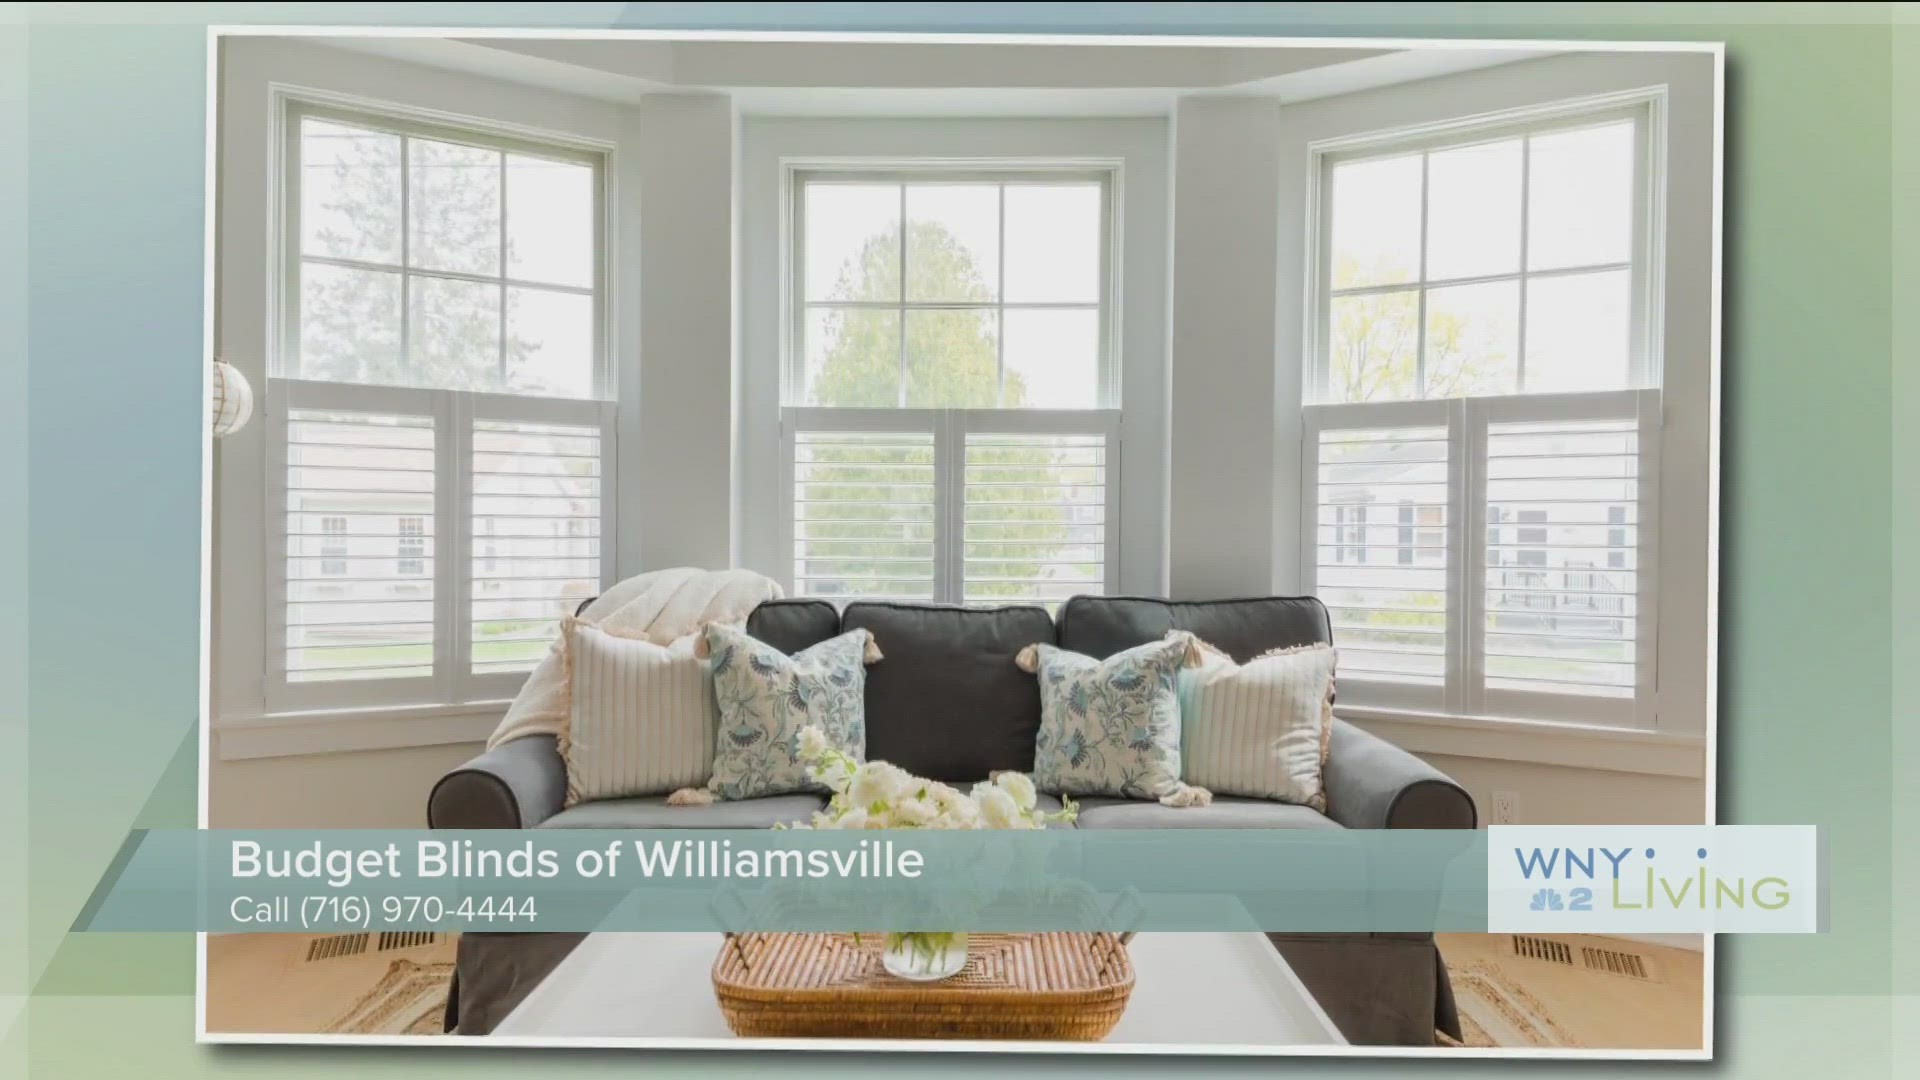 May 13th - WNY LIVING - BUDGET BLINDS (THIS VIDEO IS SPONSORED BY BUDGET BLINDS OF WILLIAMSVILLE)